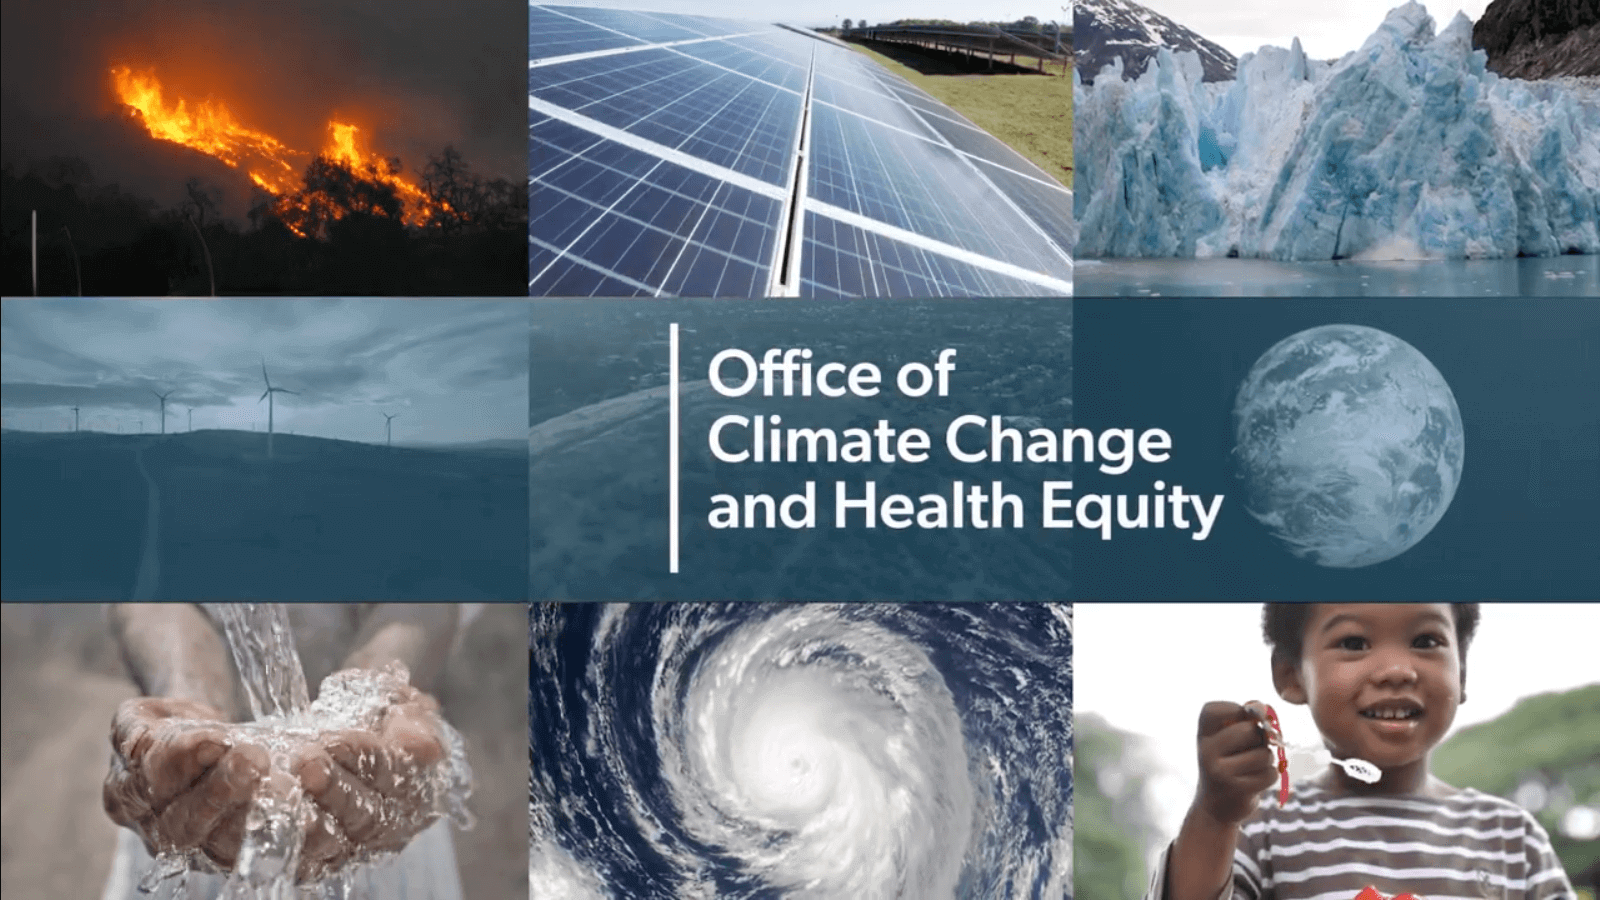 HHS Establishes the Office of Climate Change and Health Equity